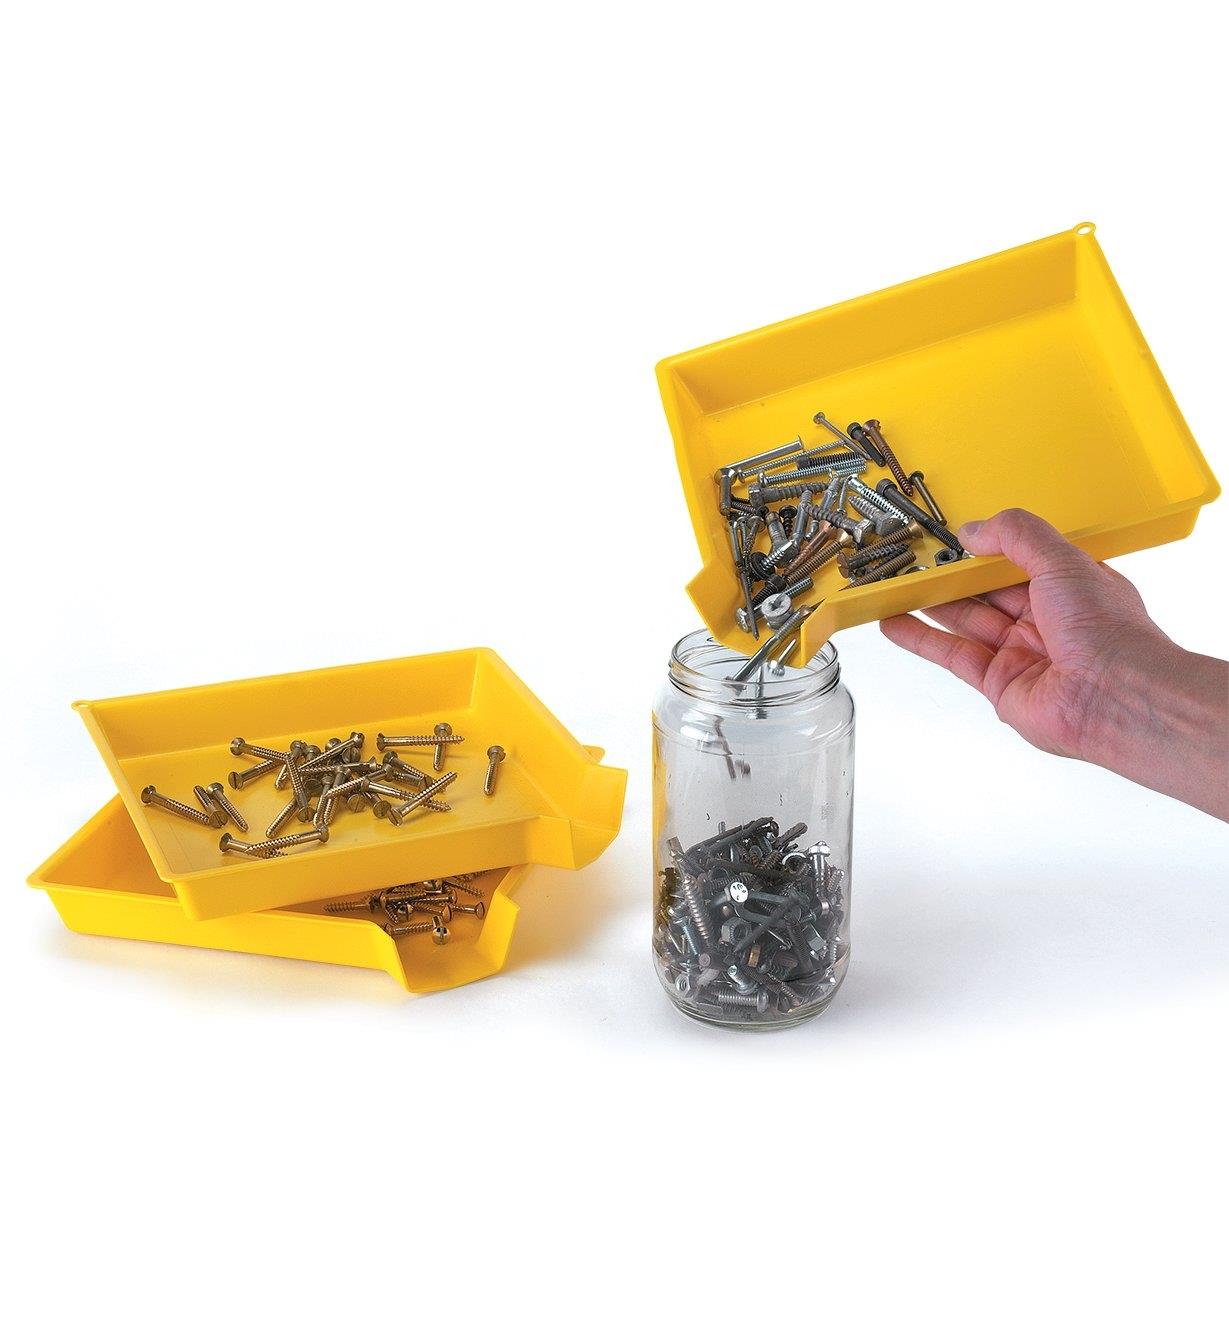 Pouring screws from a sorting tray into a jar